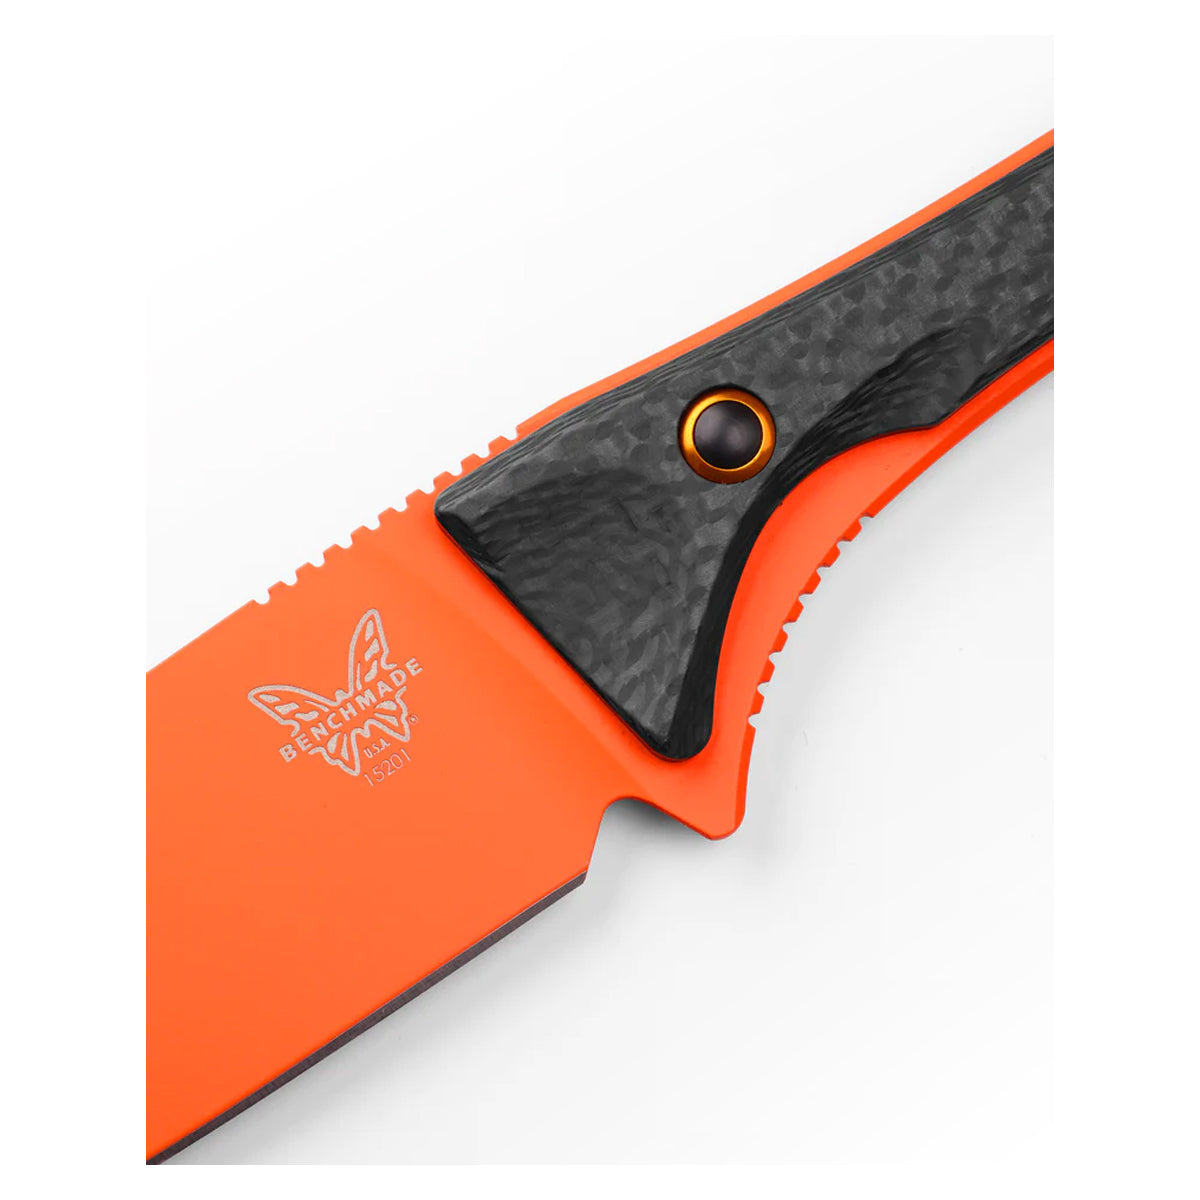 Benchmade 15201OR Altitude in  by GOHUNT | Benchmade - GOHUNT Shop